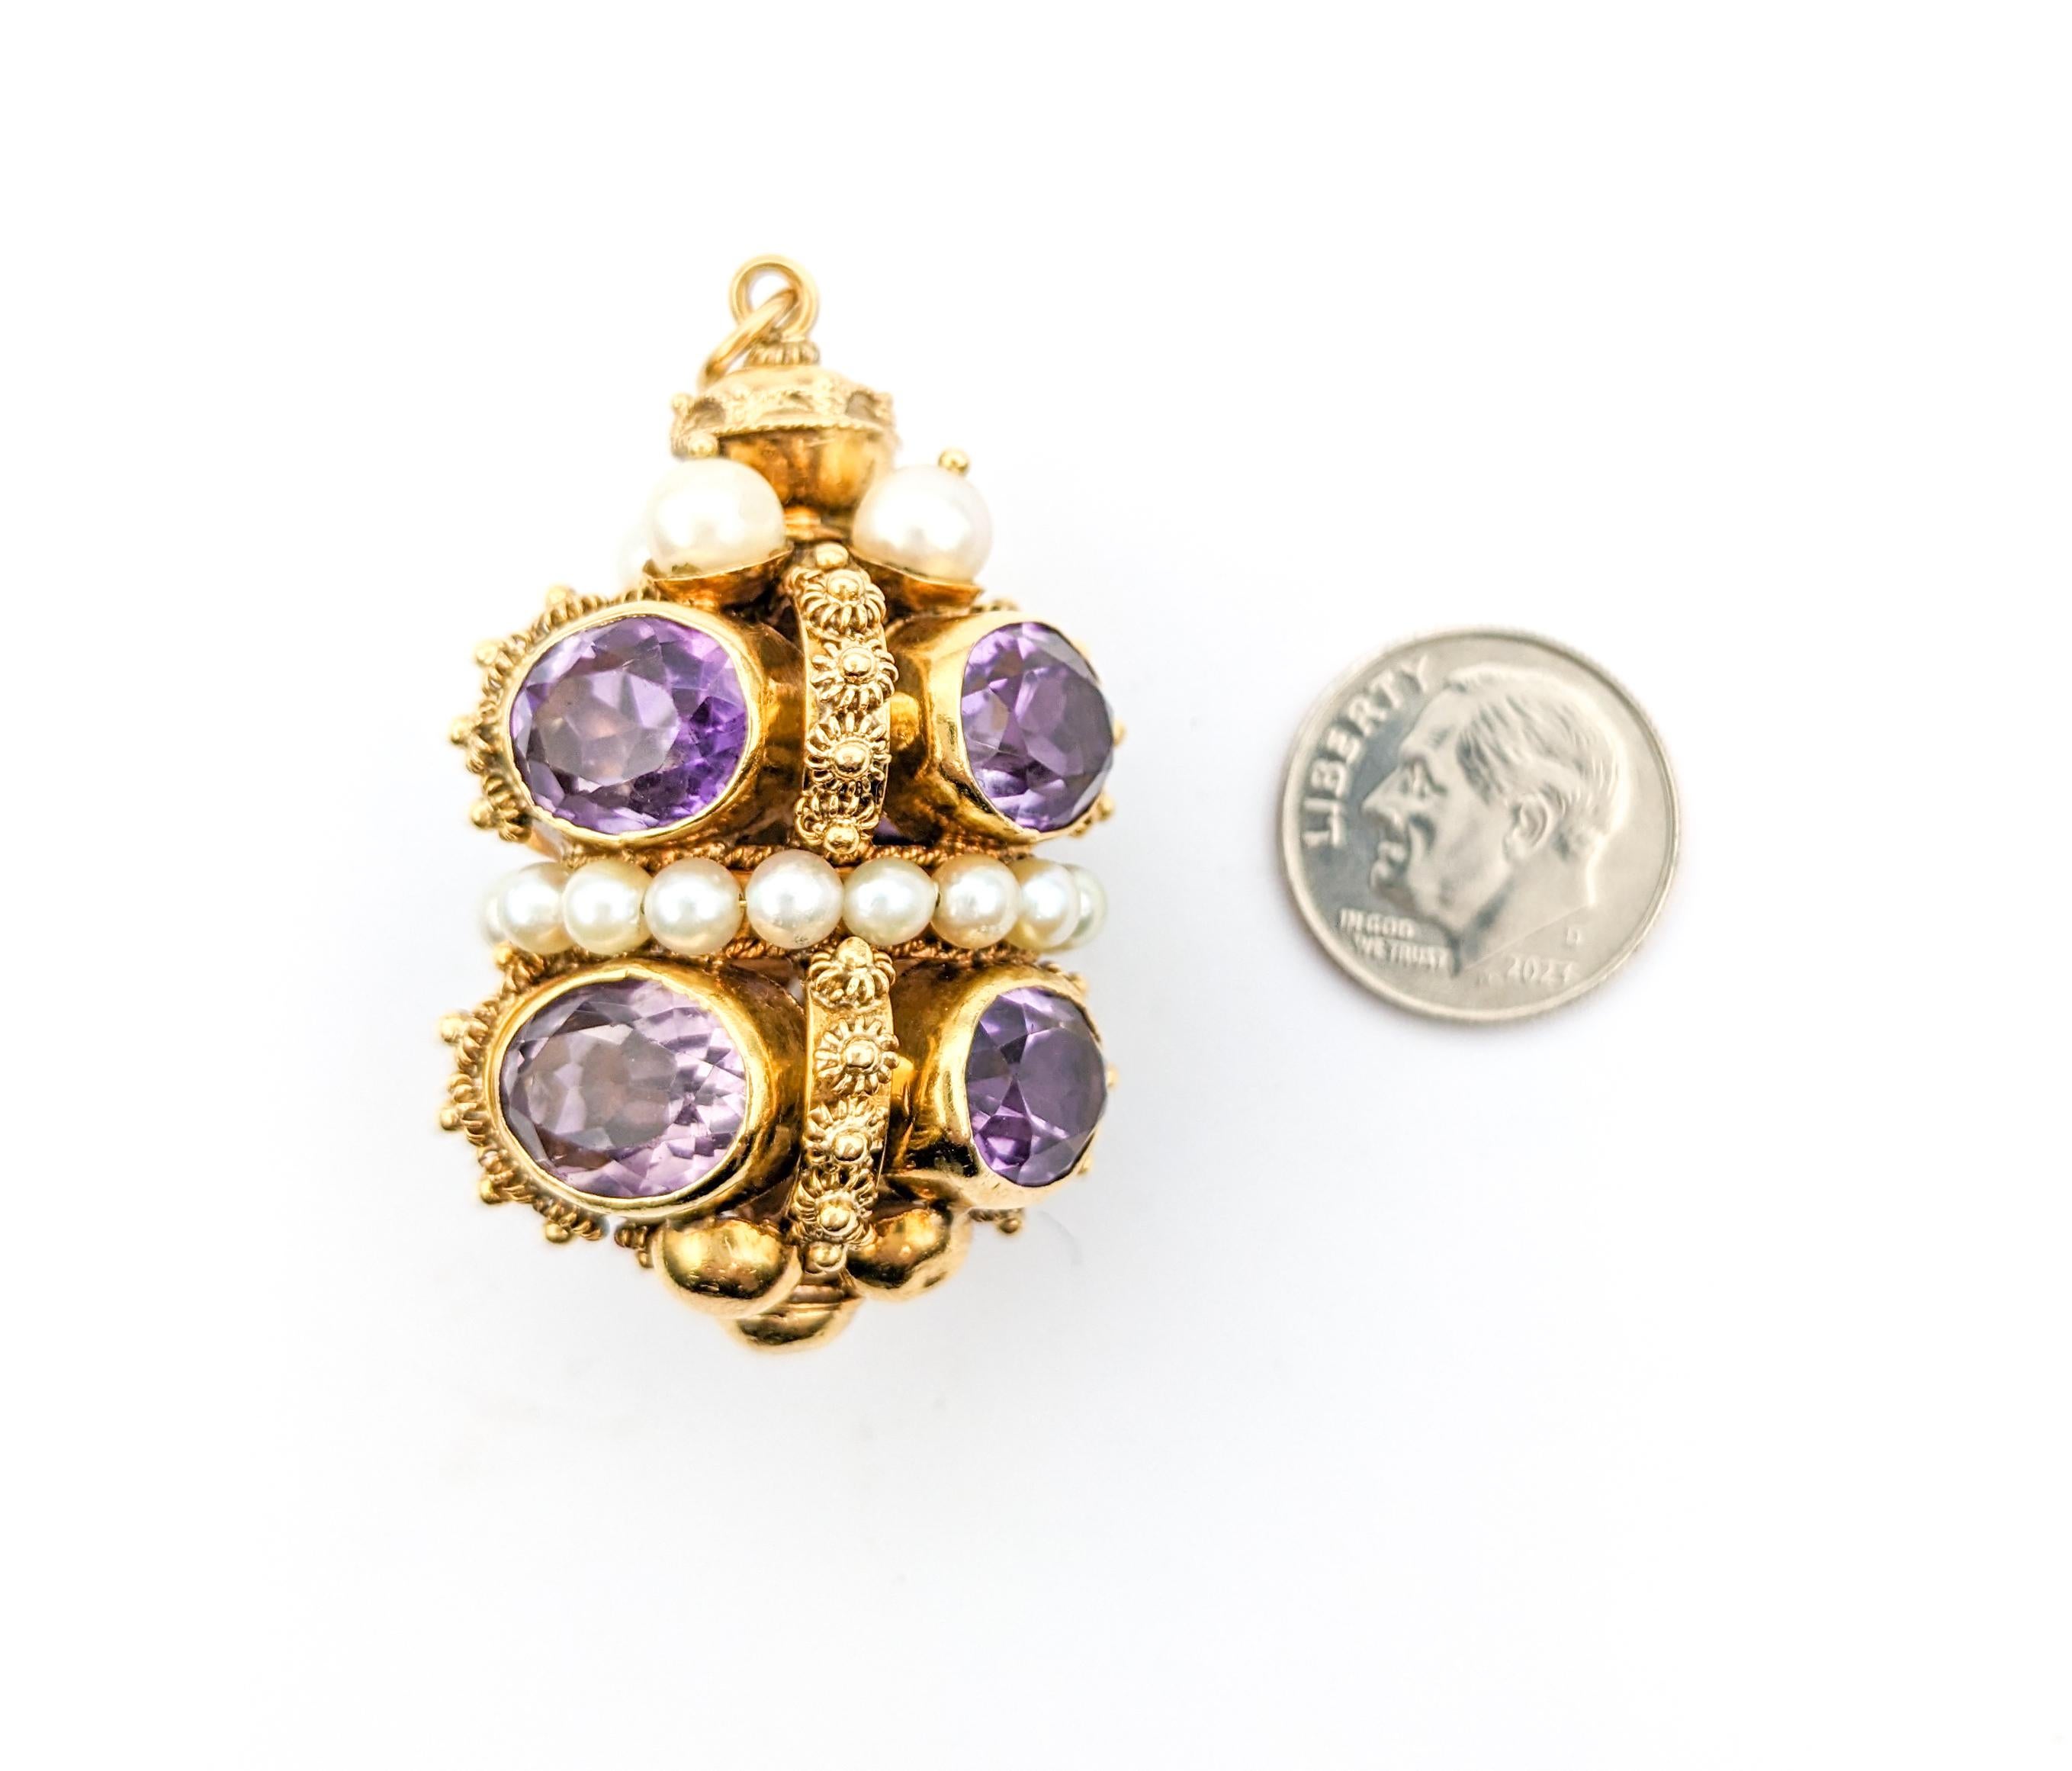 Etruscan Revival 18K Gold, Amethyst & Pearl Fob Pendant For Sale 1